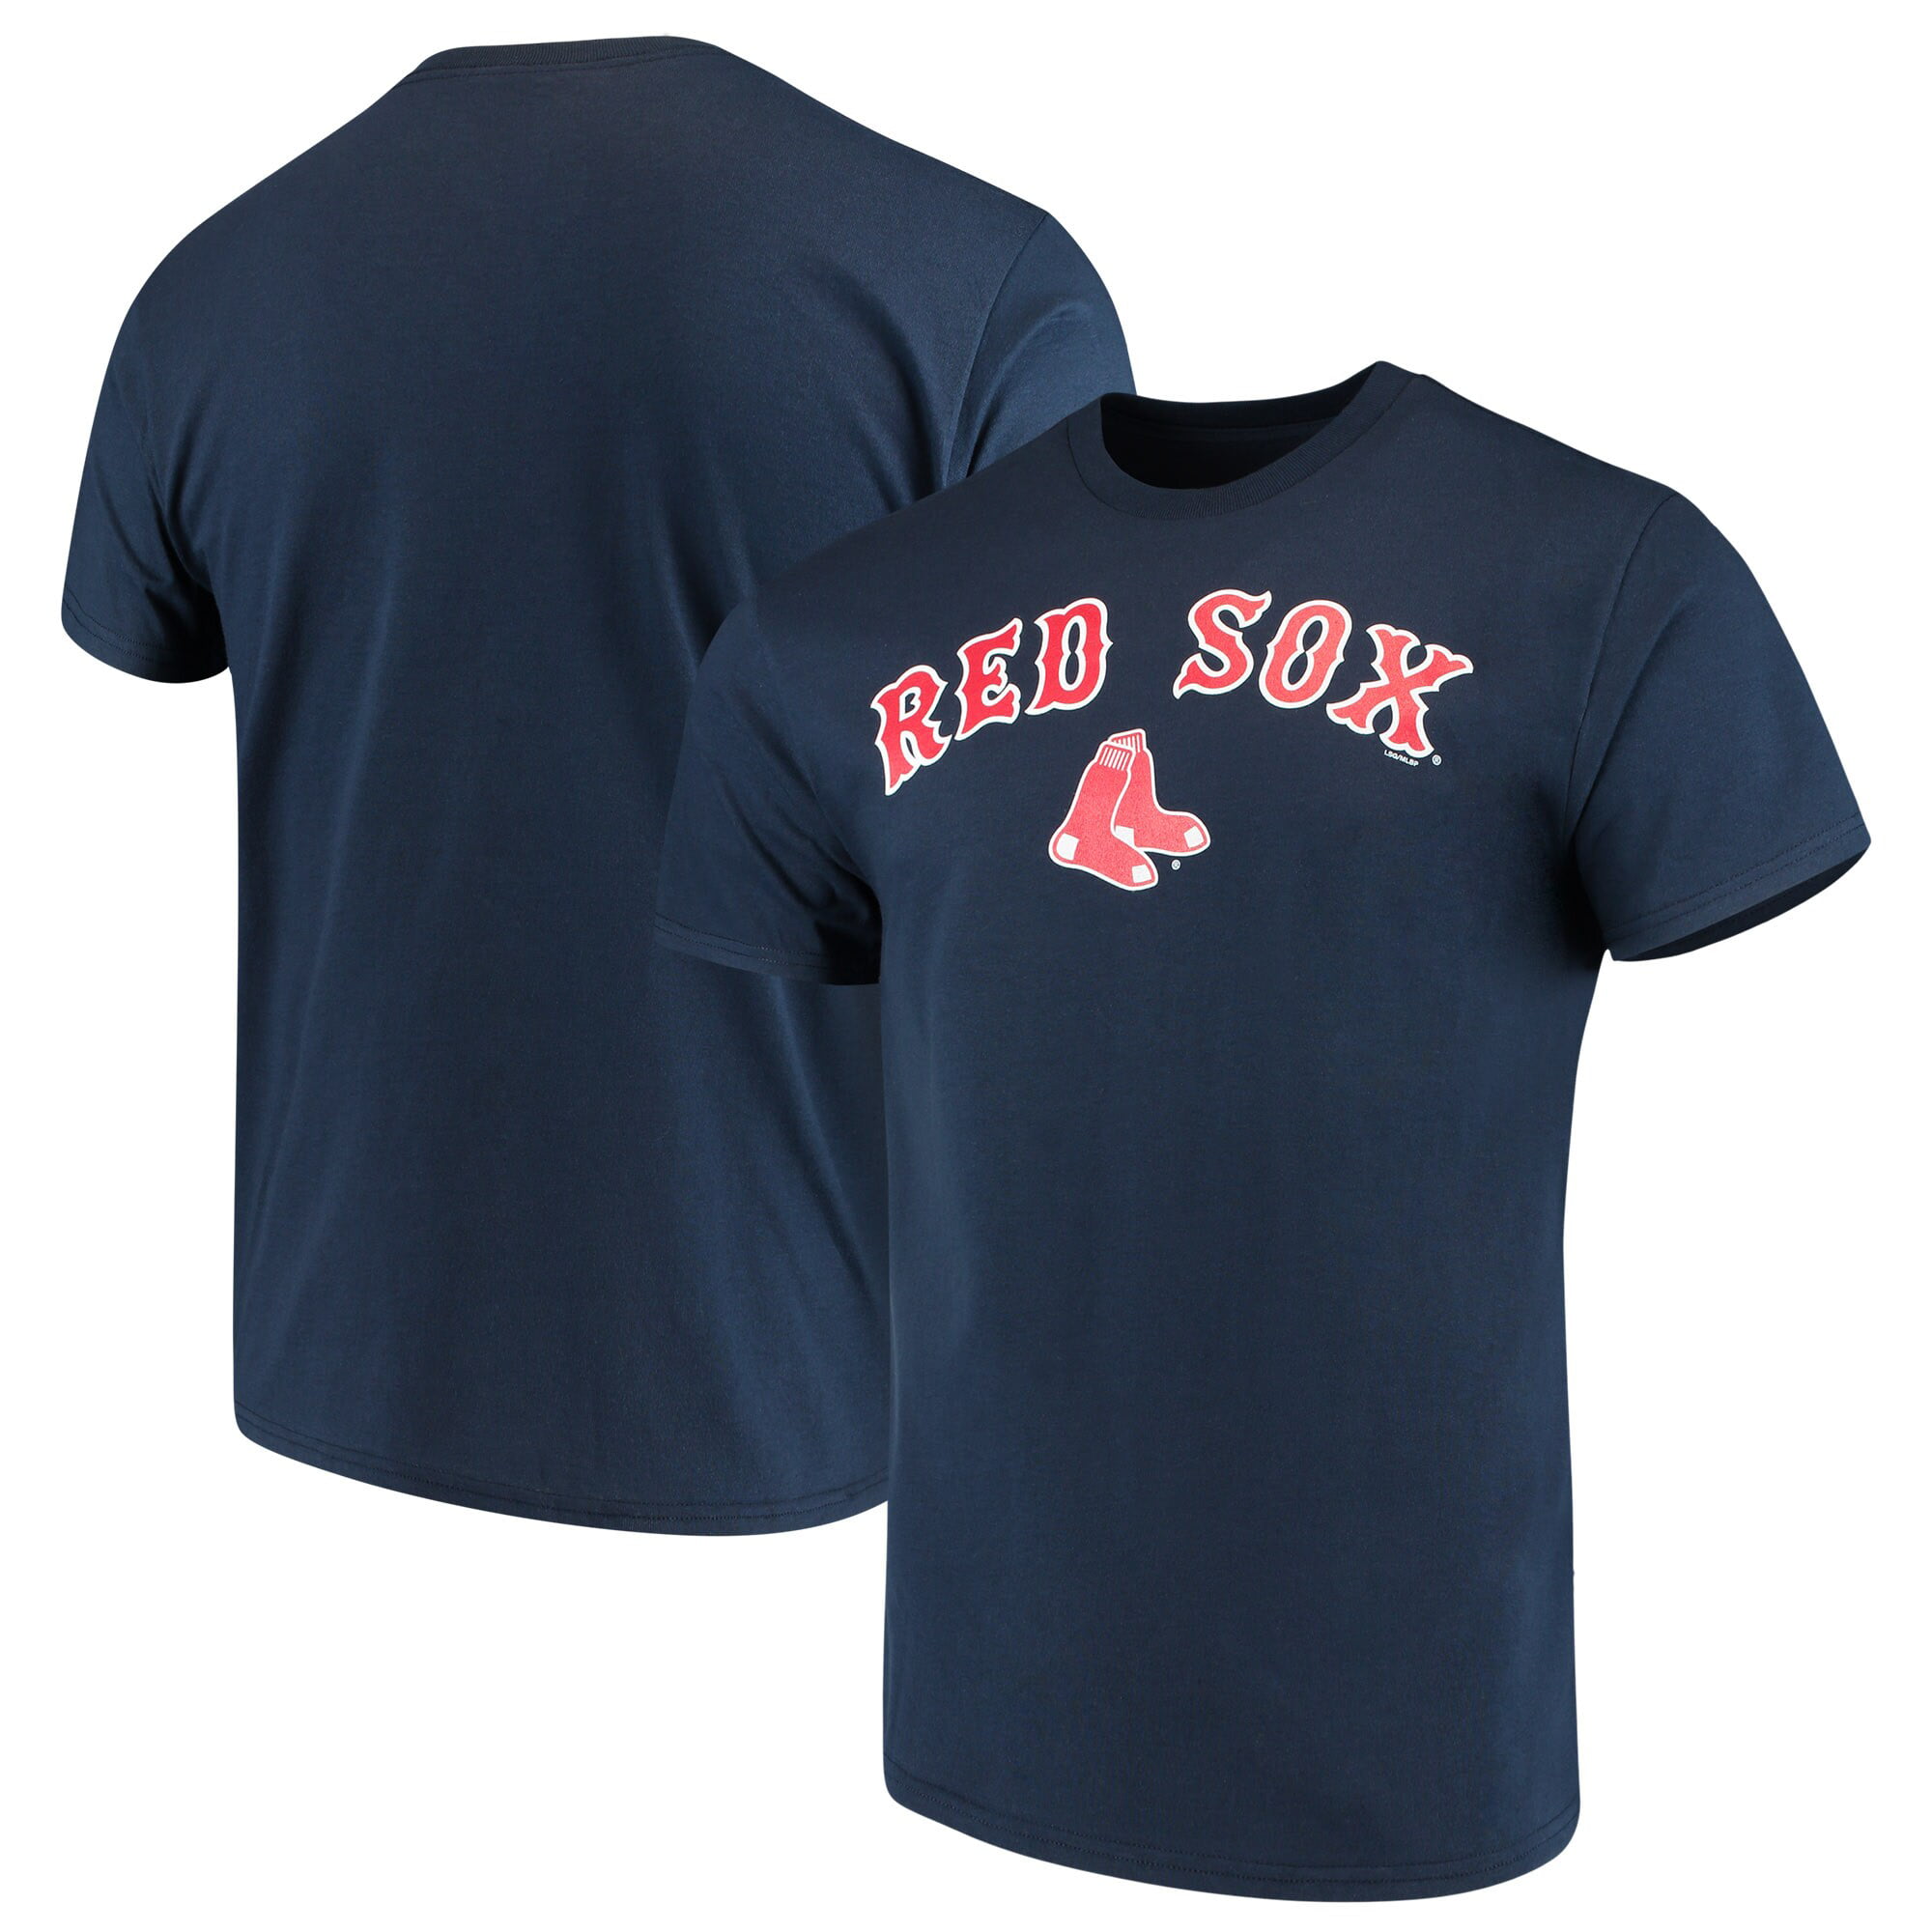 red sox shirts sale